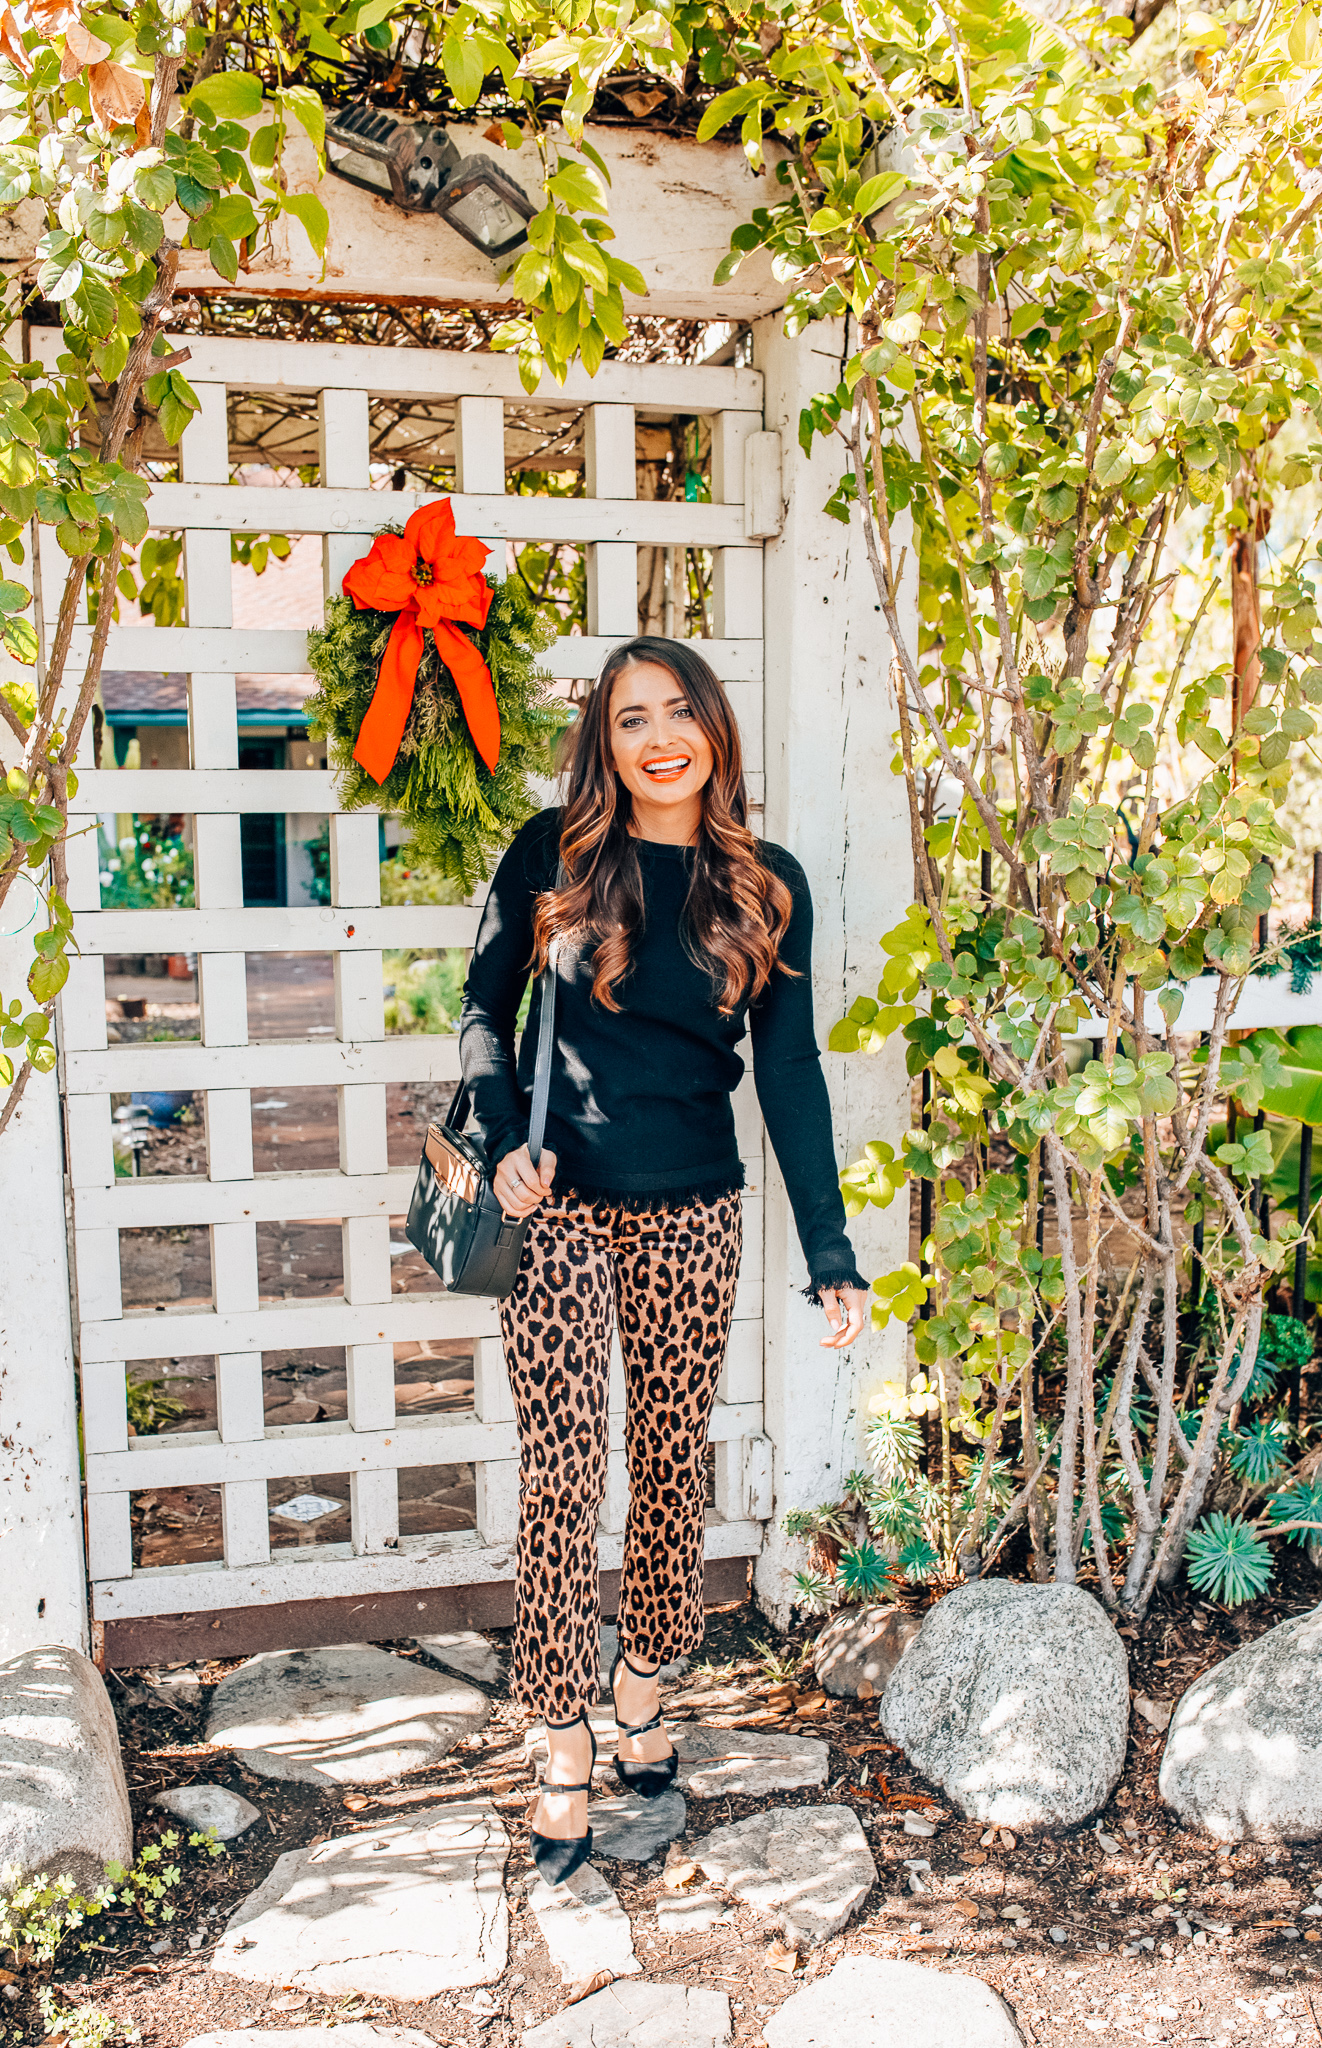 Leopard Holiday style featured by top Orange County fashion blogger, Maxie Elle: image of a woman wearing an Ann Taylor black fringe sweater, Ann Taylor leopard velvet pants, and Ann Taylor camera bag